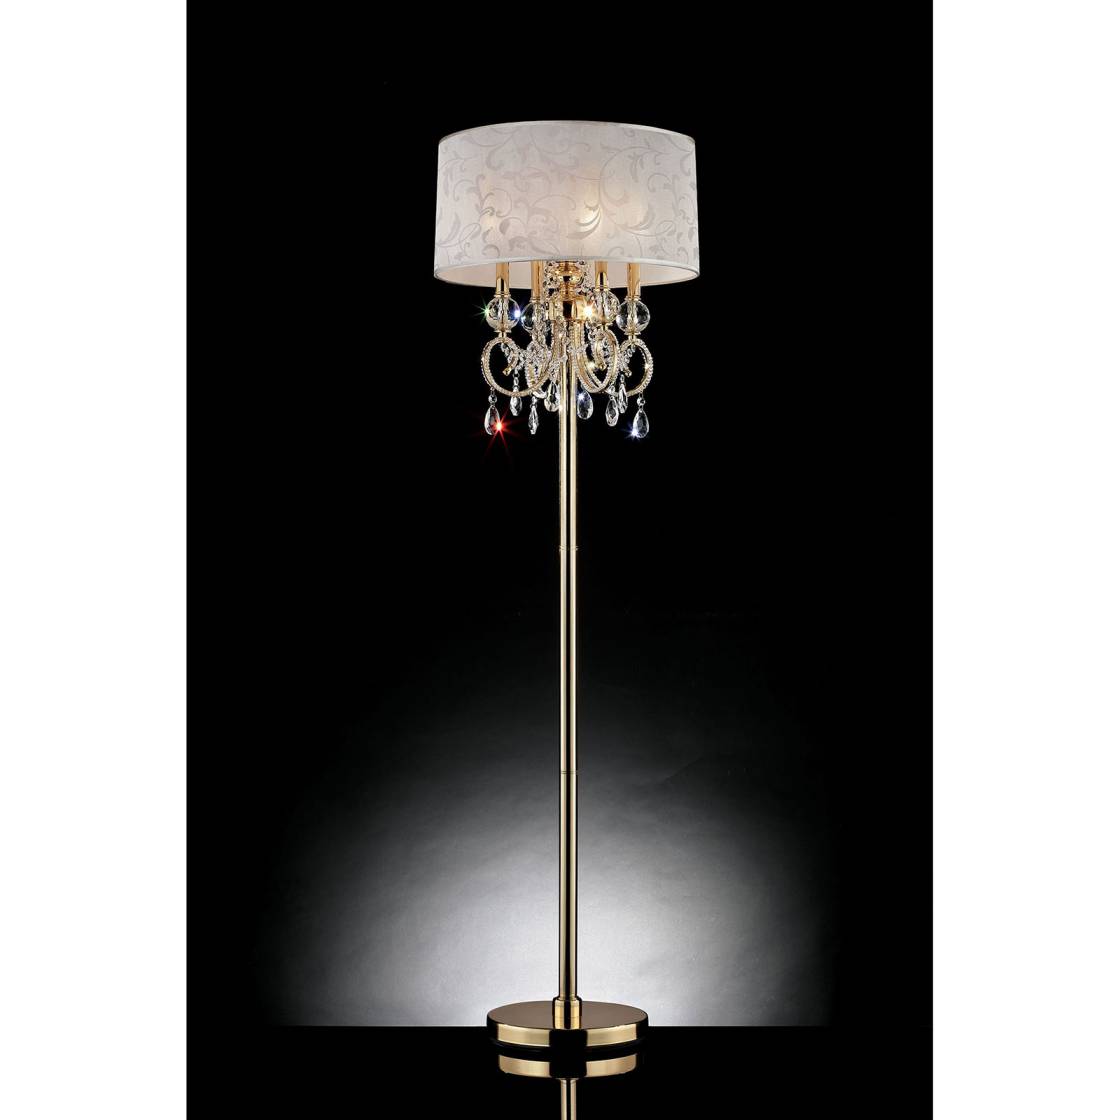 Chandelier Floor Lamp With Hanging Crystals And Floral Pattern Shade, Gold By Benzara